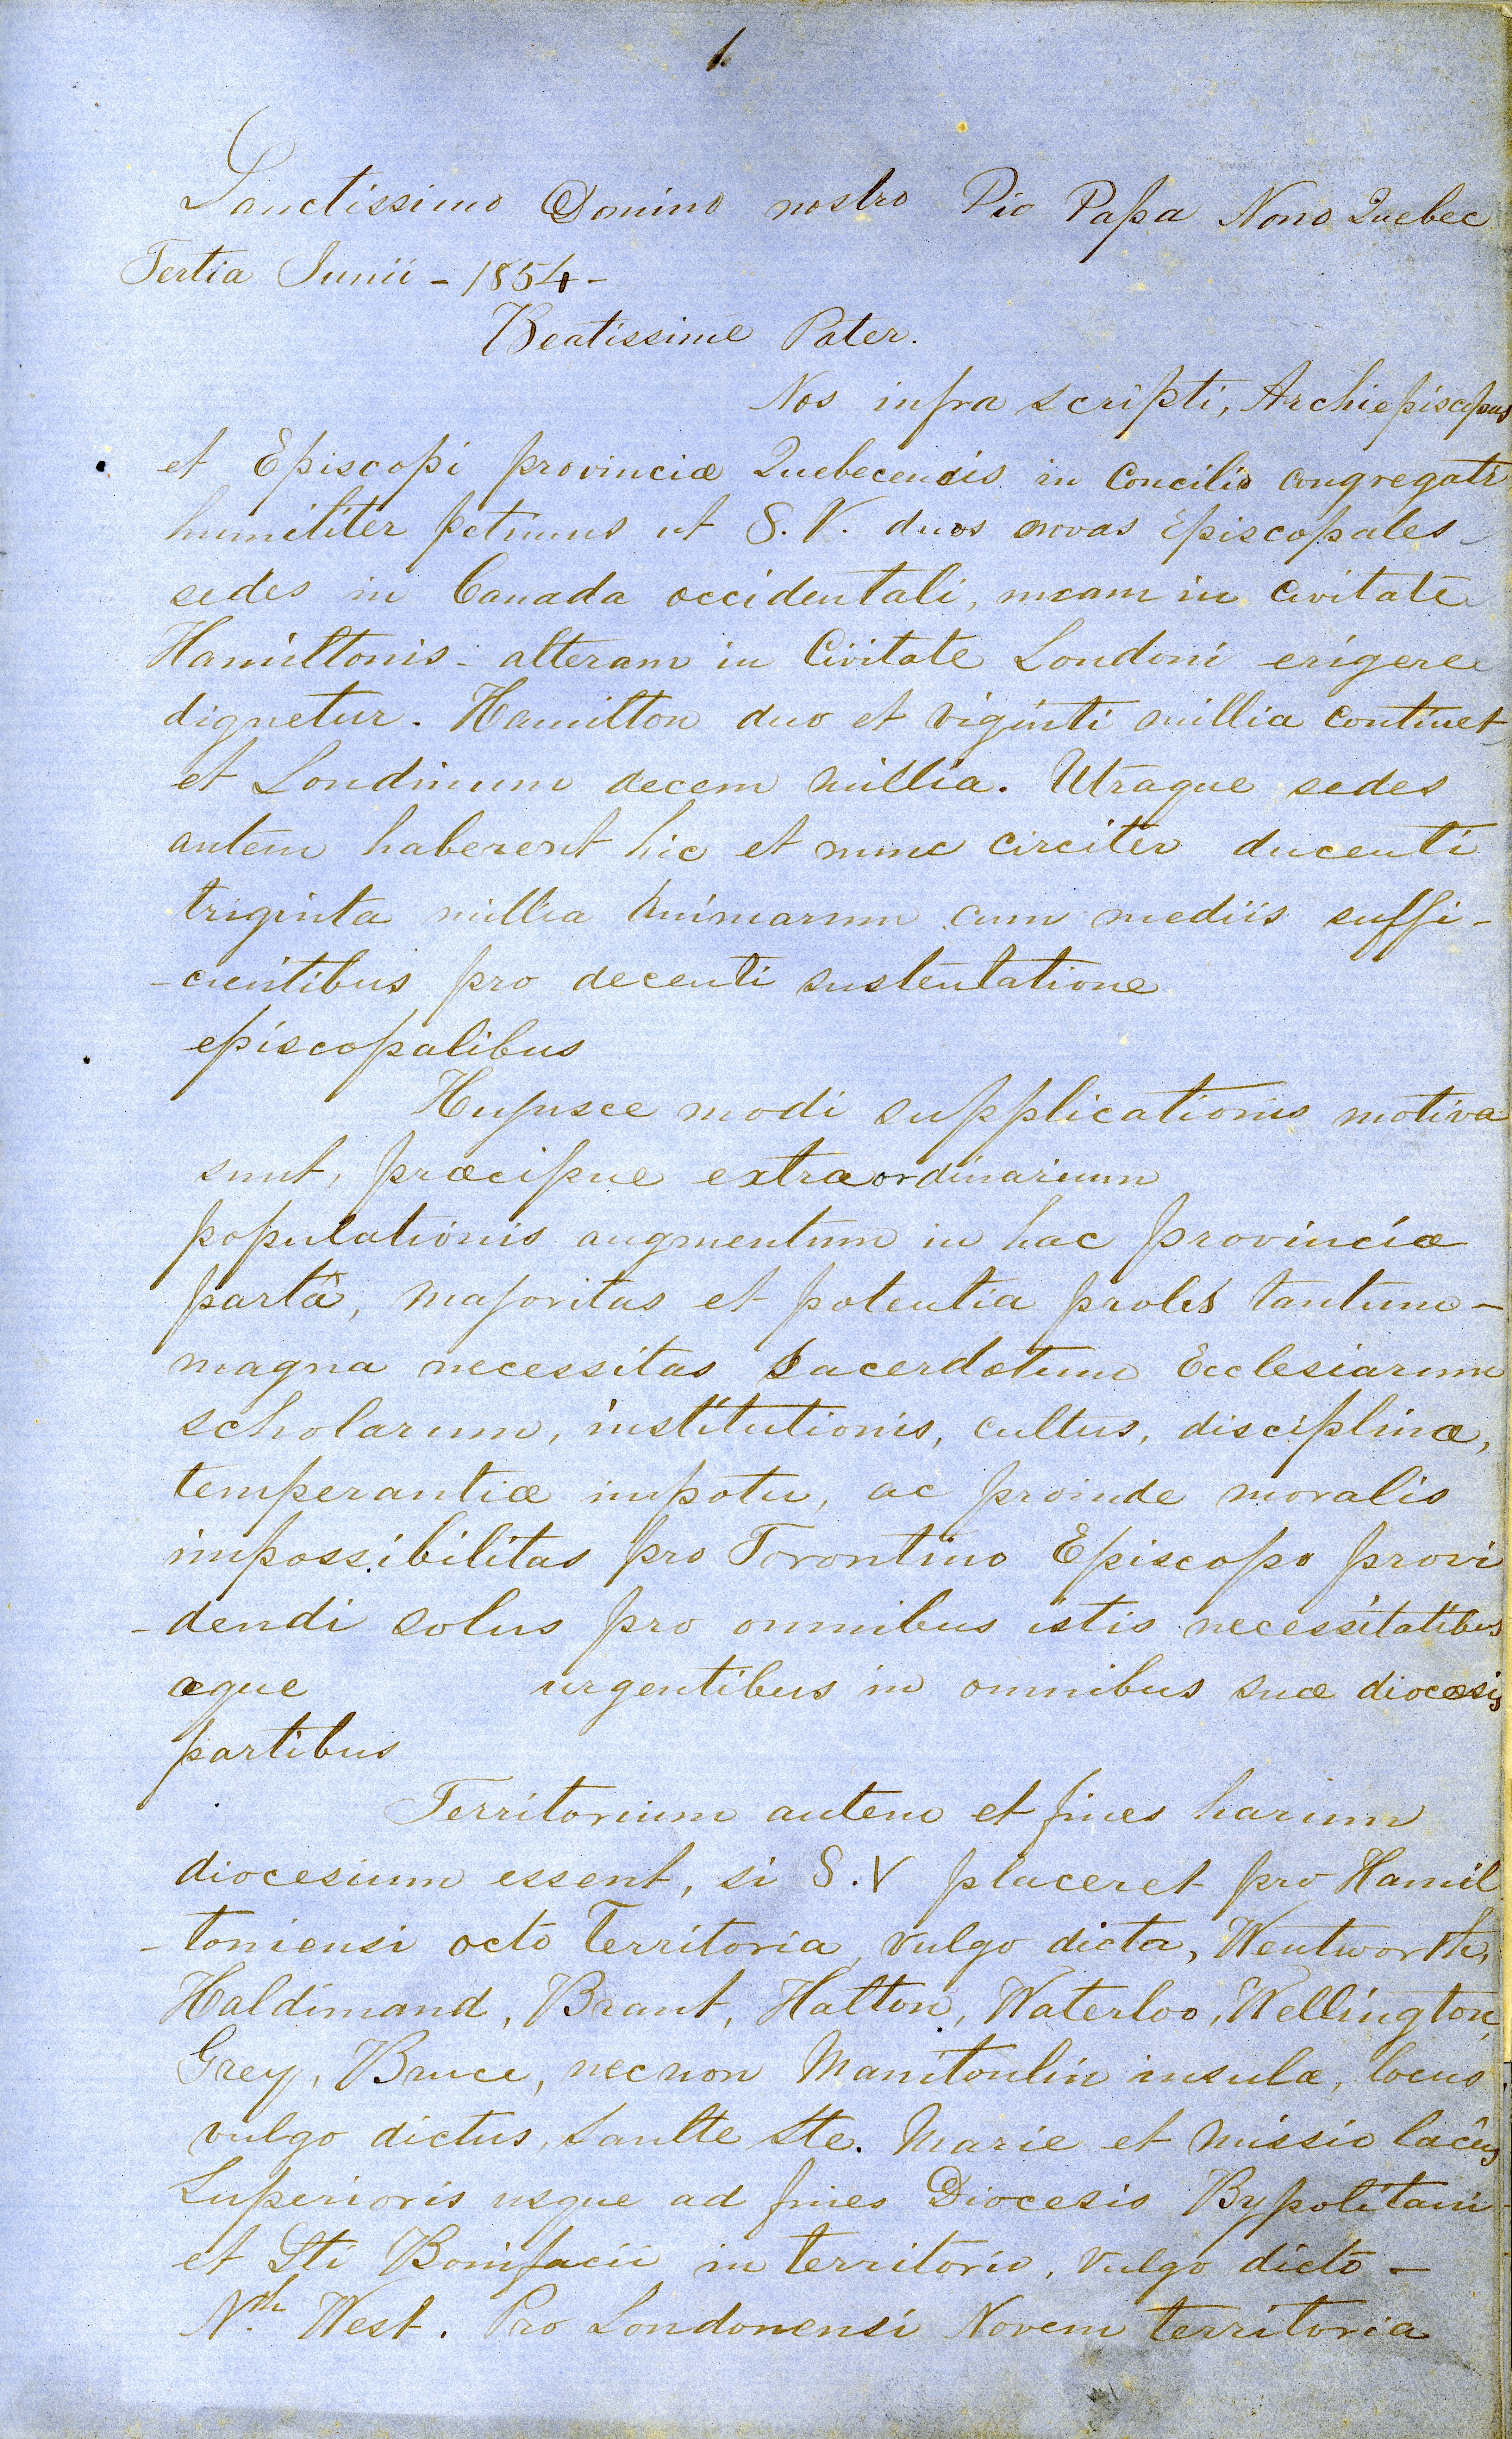 Photograph of the first page of a letter from the Bishops of Quebec to the Sacred Congregation for the Propagation of Faith in Rome, June 3, 1854 . The letter is hand written in cursive in Latin on blue paper.